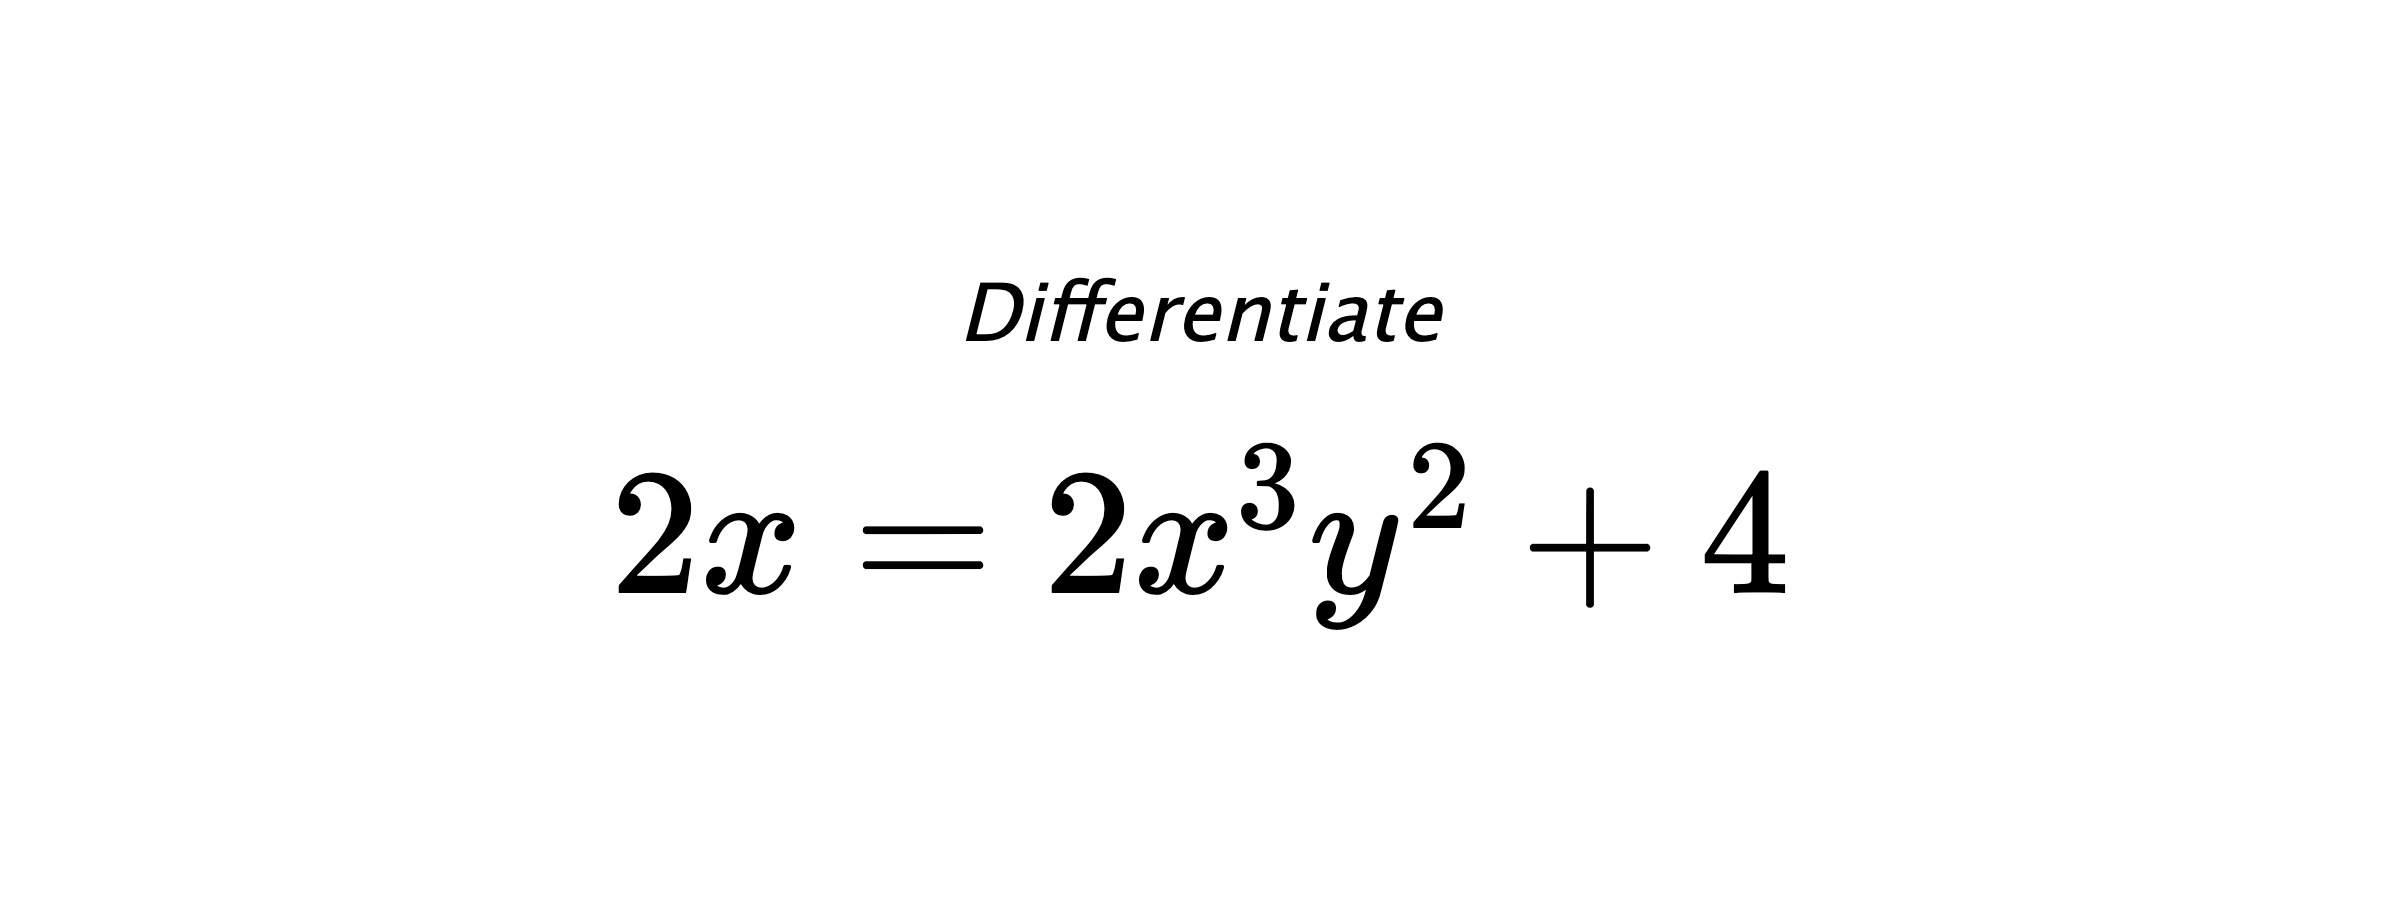 Differentiate $ 2x = 2x^3y^2+4 $